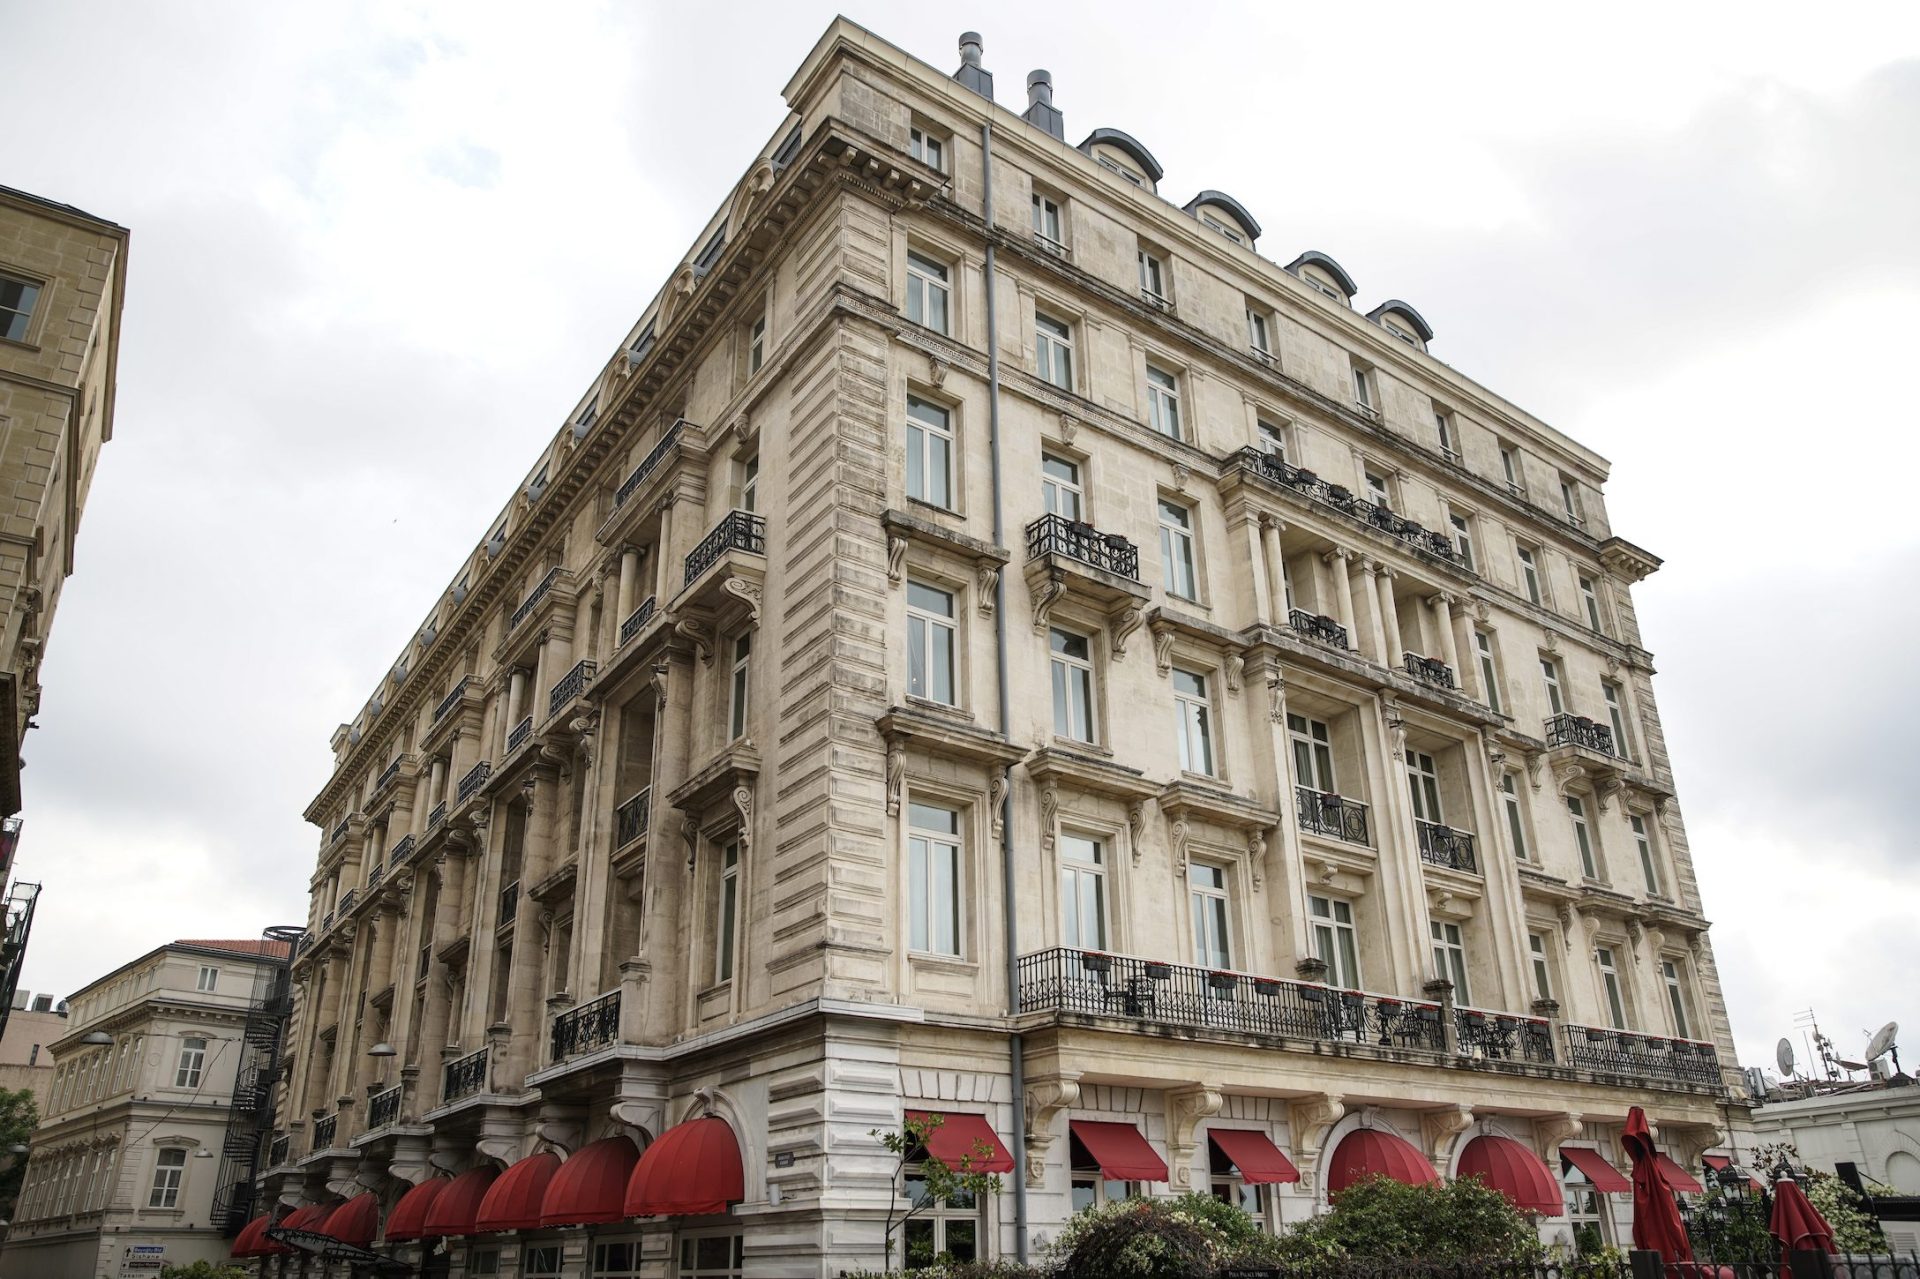 Fun facts about Pera Palace Hotel in Istanbul